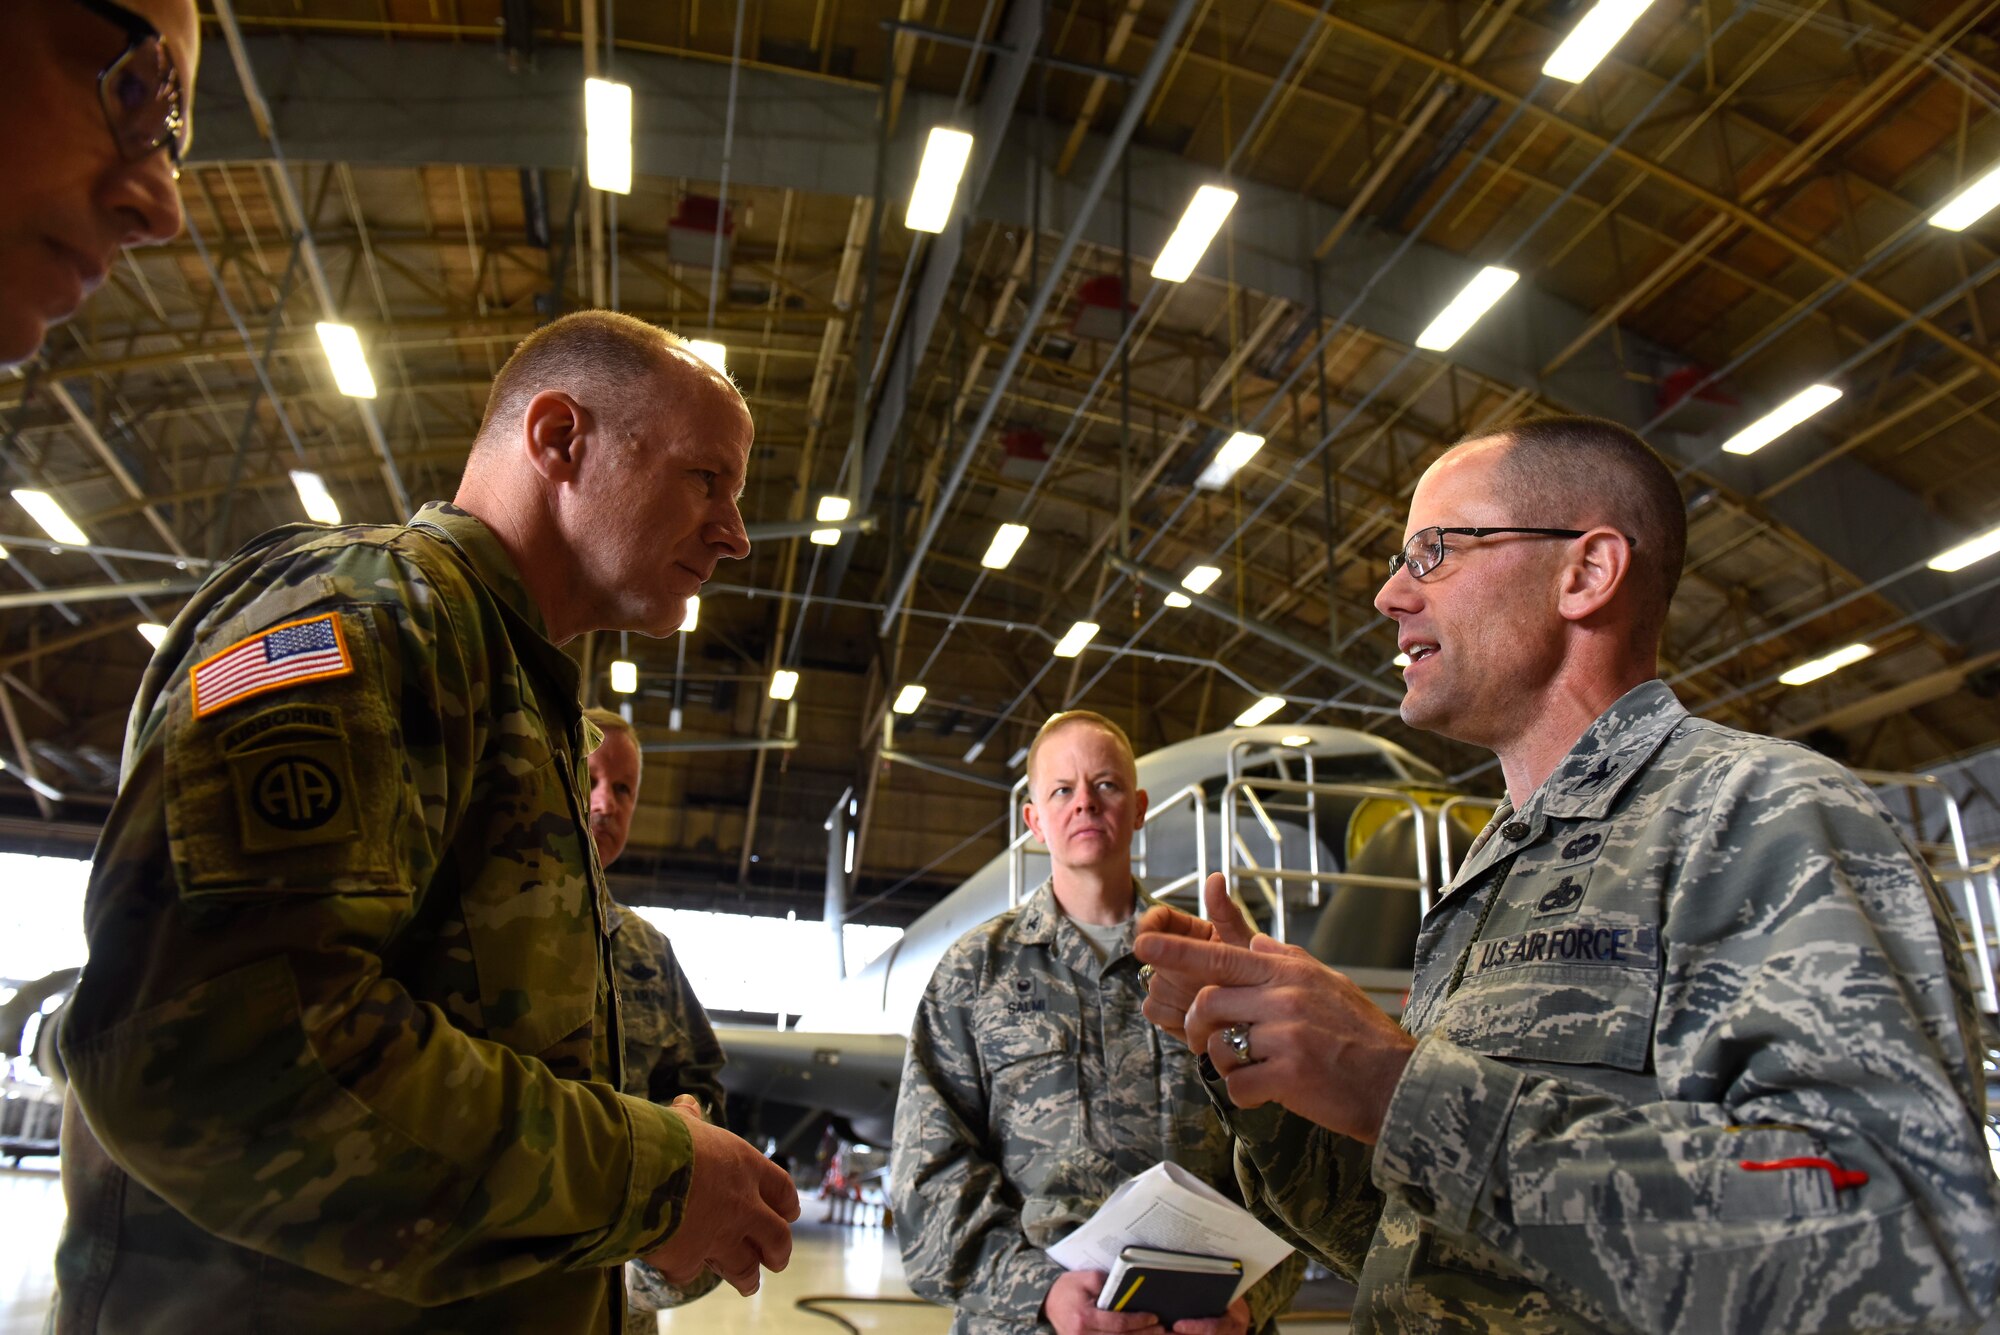 U.S. Army Gen. Stephen Lyons, U.S. Transportation Command commander, and U.S. Air Force Col. Michael O'Connor, 92nd Maintenance Group commander, discuss what it takes to keep the KC-135 Stratotanker mission-ready at Fairchild Air Force Base, Washington, Sept. 19, 2018.